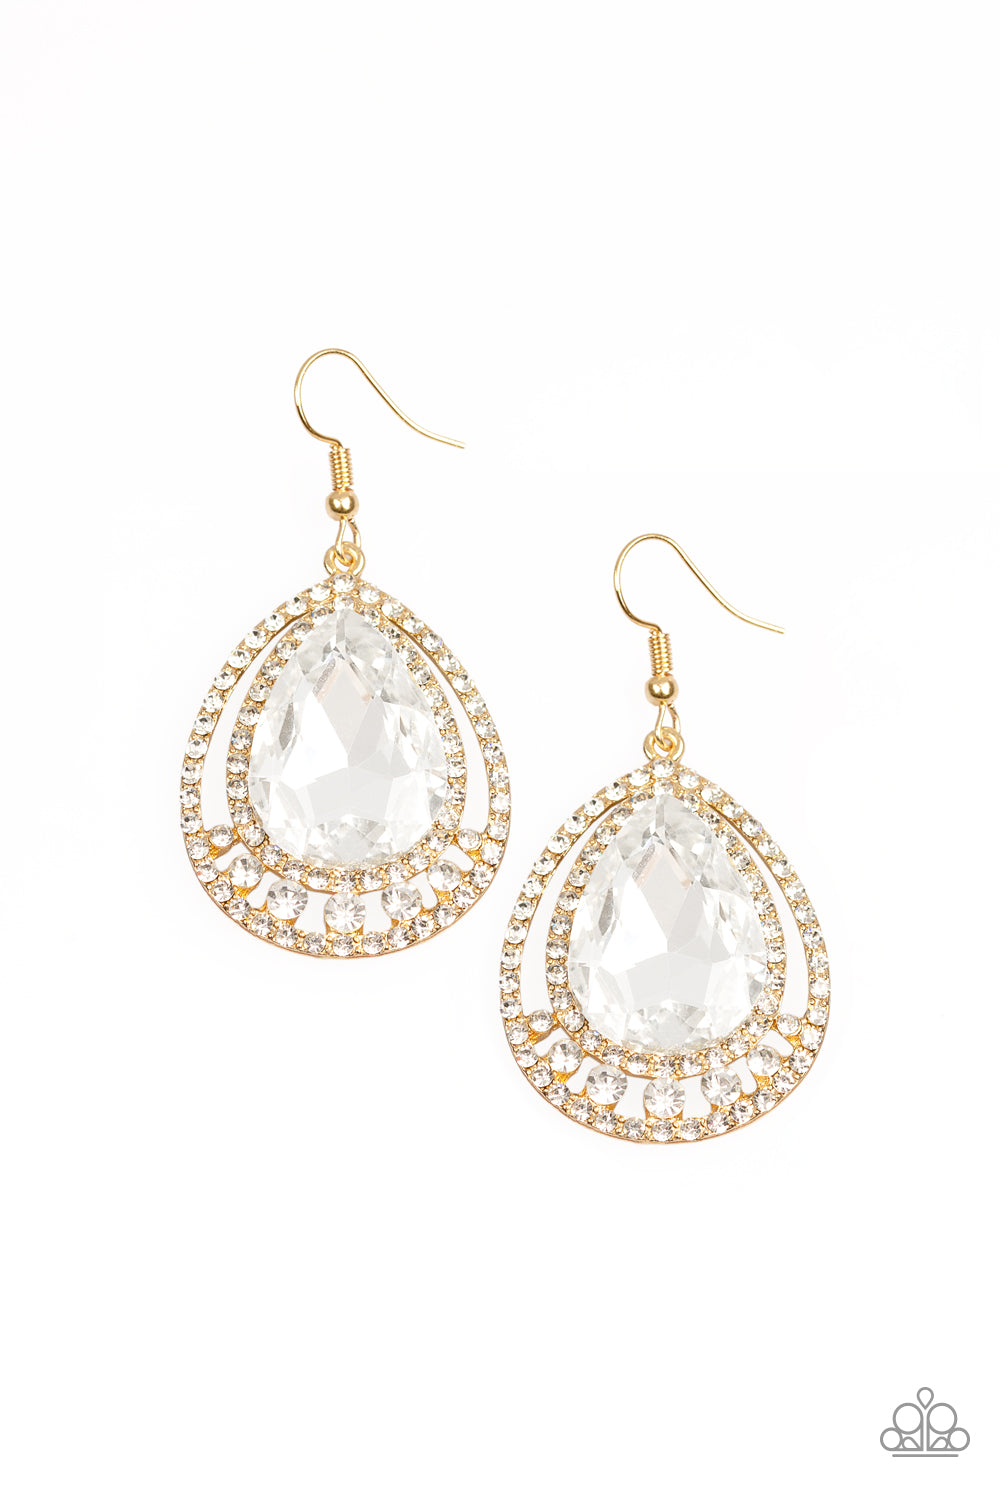 Paparazzi All Rise For Her Majesty - Gold Rhinestone Earrings - A Finishing Touch 